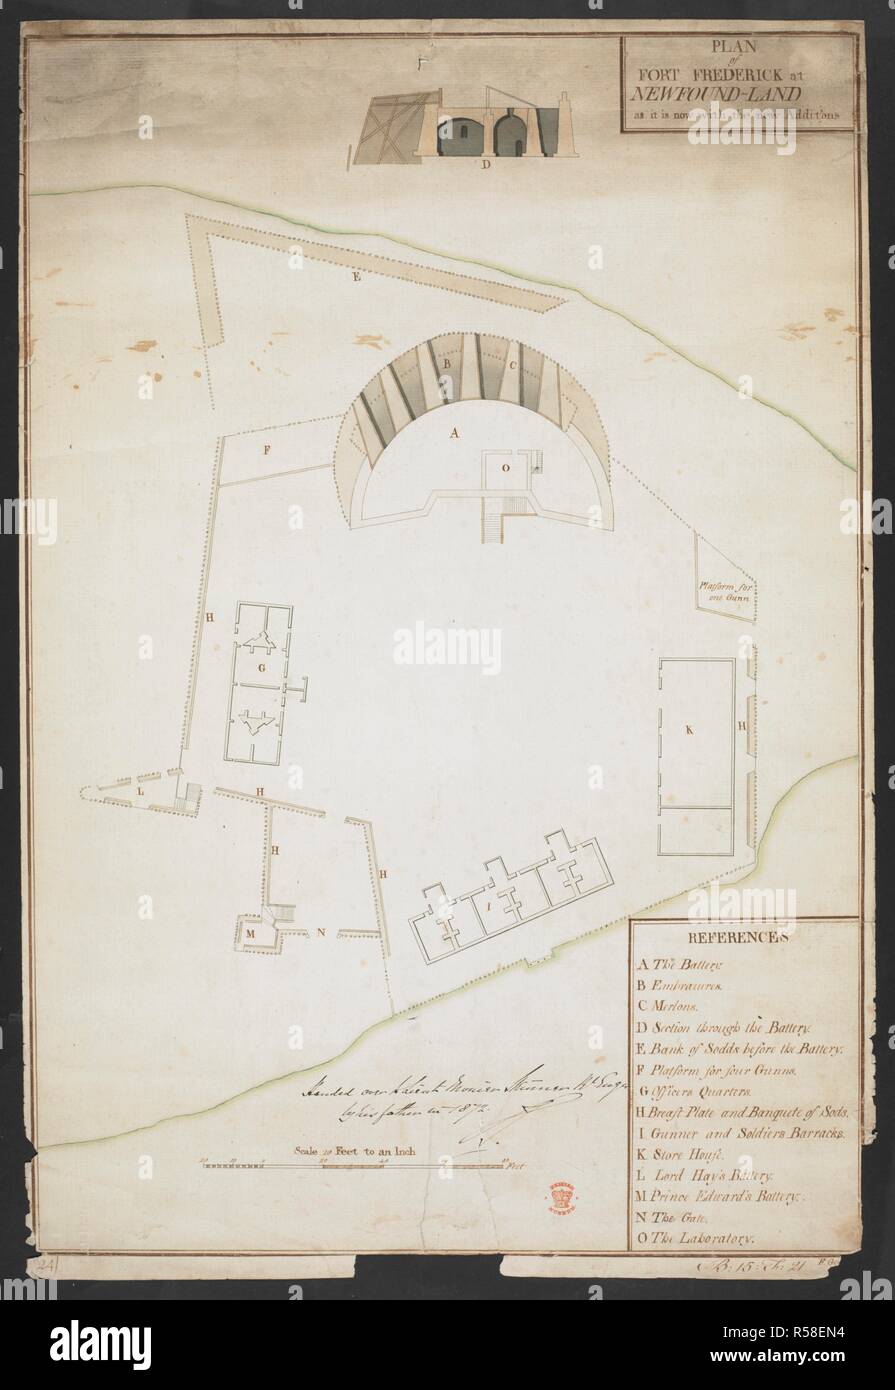 Plan of Fort Frederick at Newfound-land as it is now with new additions. St. John's harbour, and environs, Newfoundland. 18th century. Source: Add. 33231 ii. no.16. Stock Photo